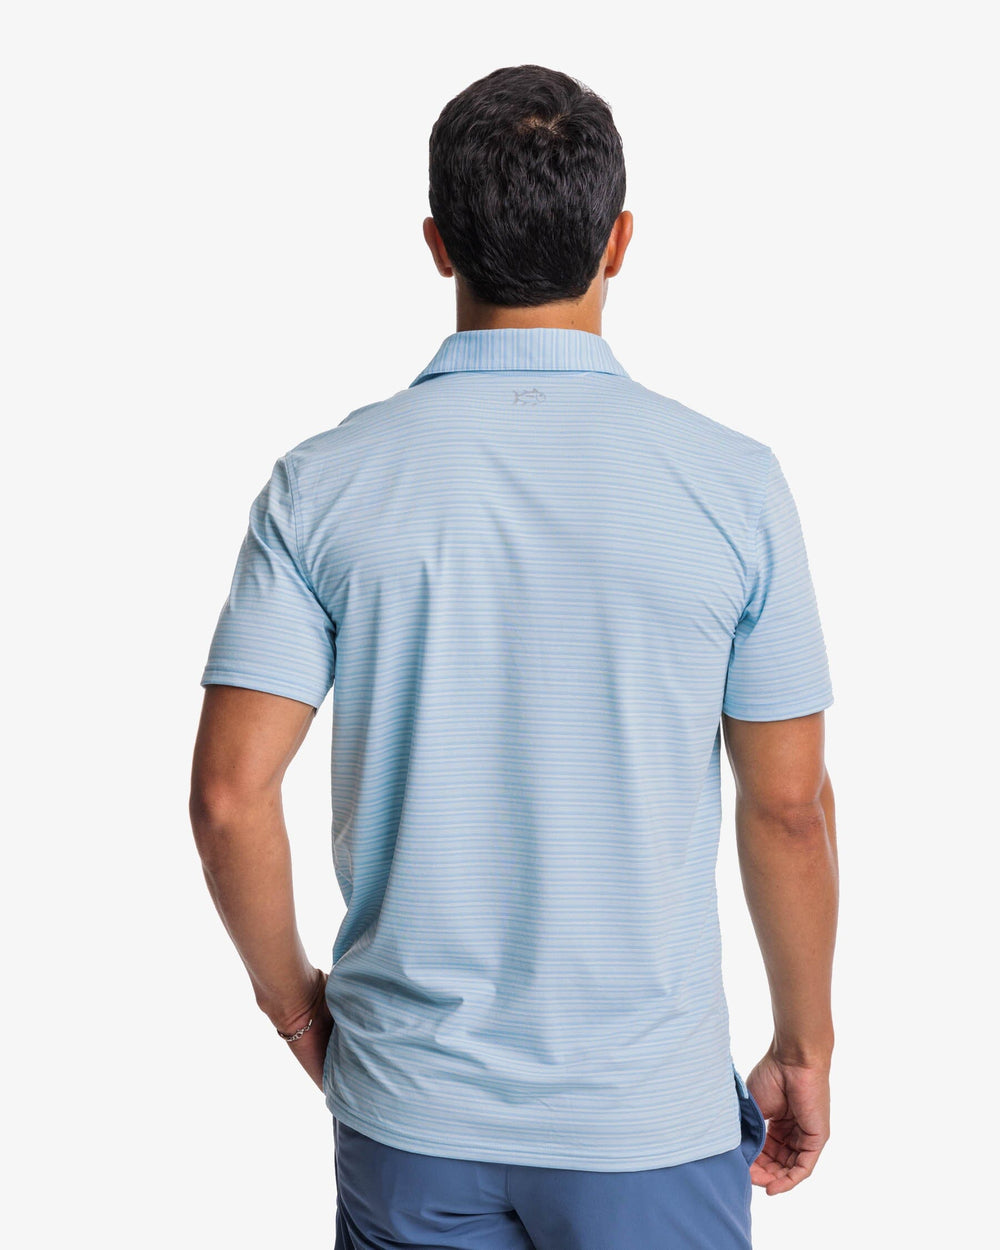 The back view of the Southern Tide brrr°®-eeze Bowen Stripe Performance Polo Shirt by Southern Tide - Rain Water